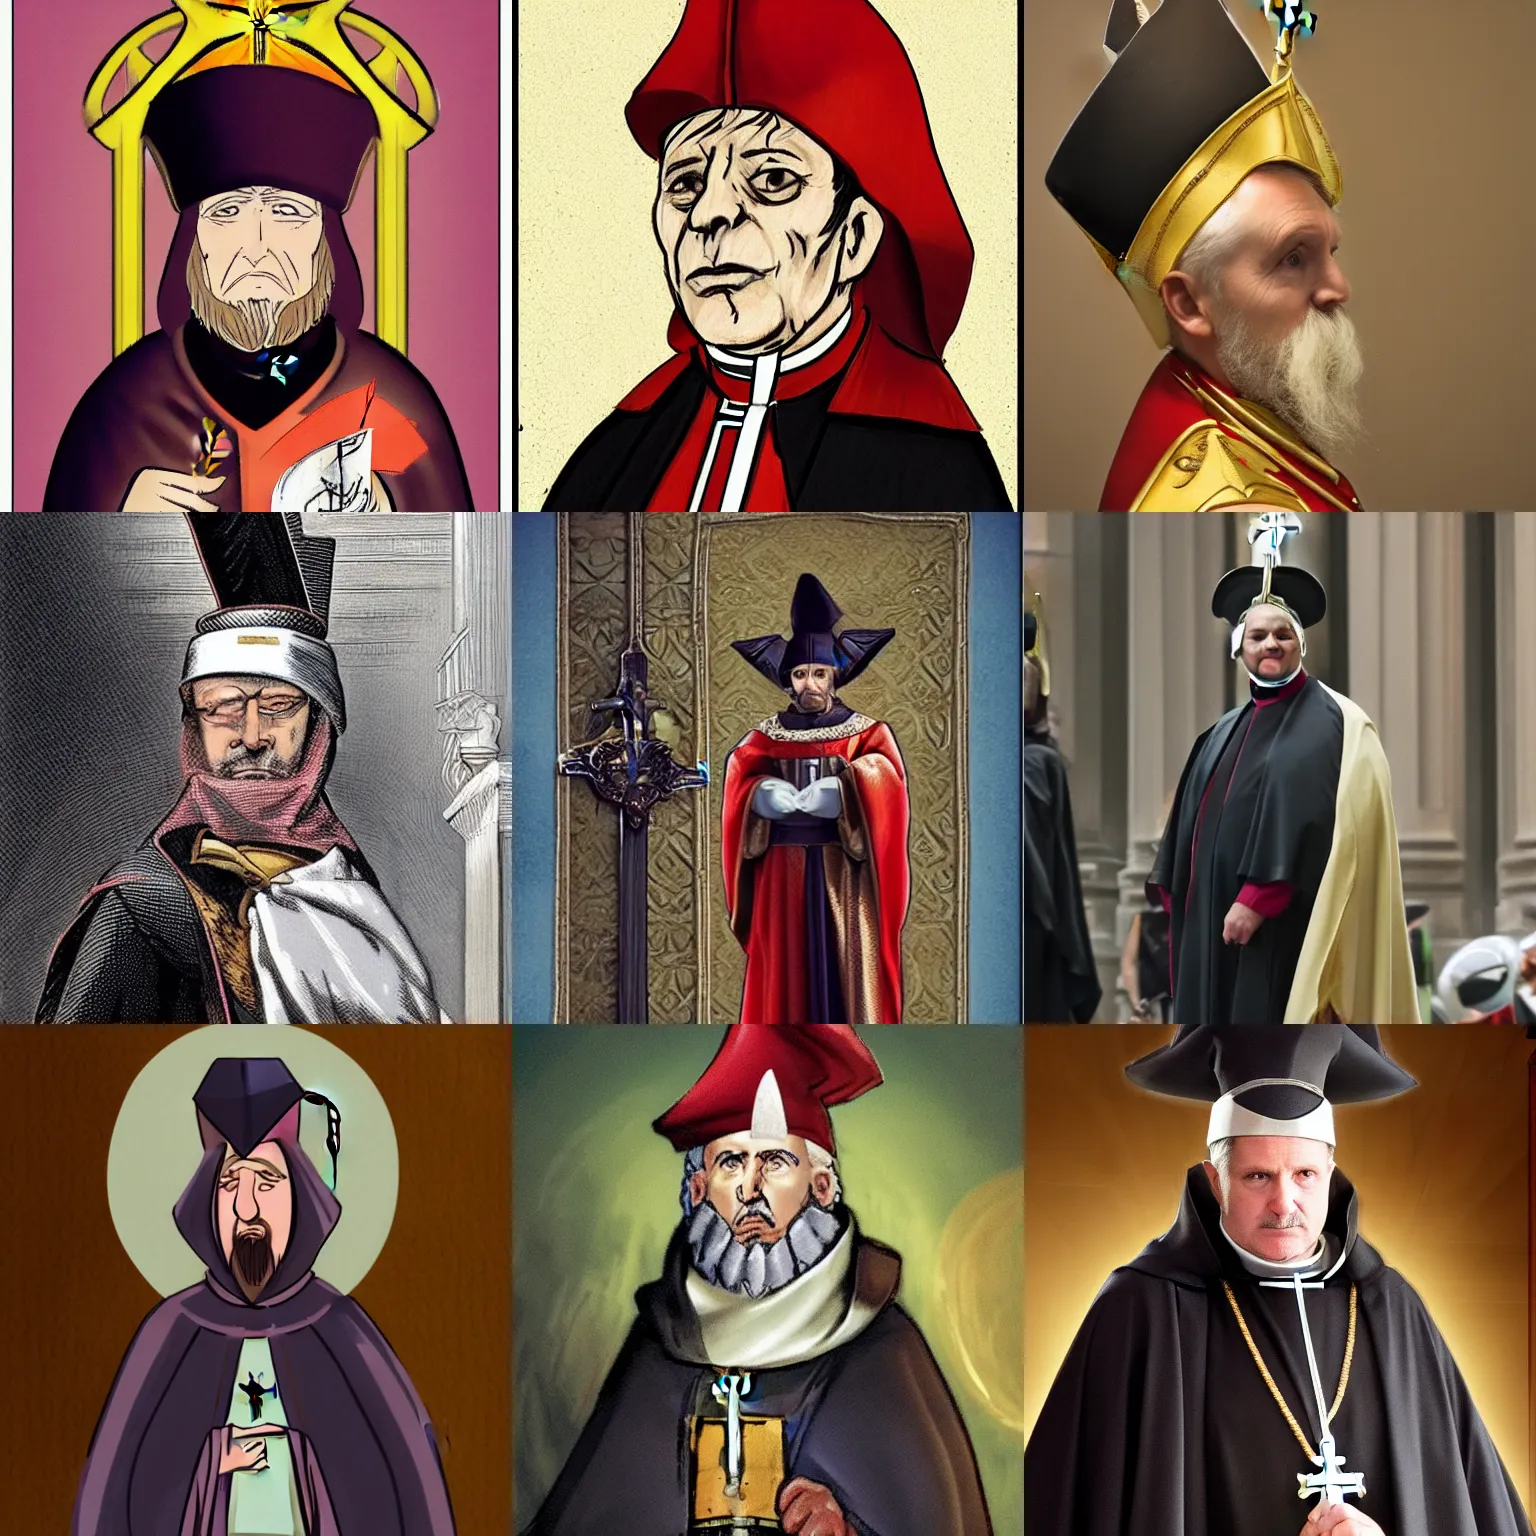 Prompt: The new character in VALORANT is a badass catholic bishop wearing a mitre hat